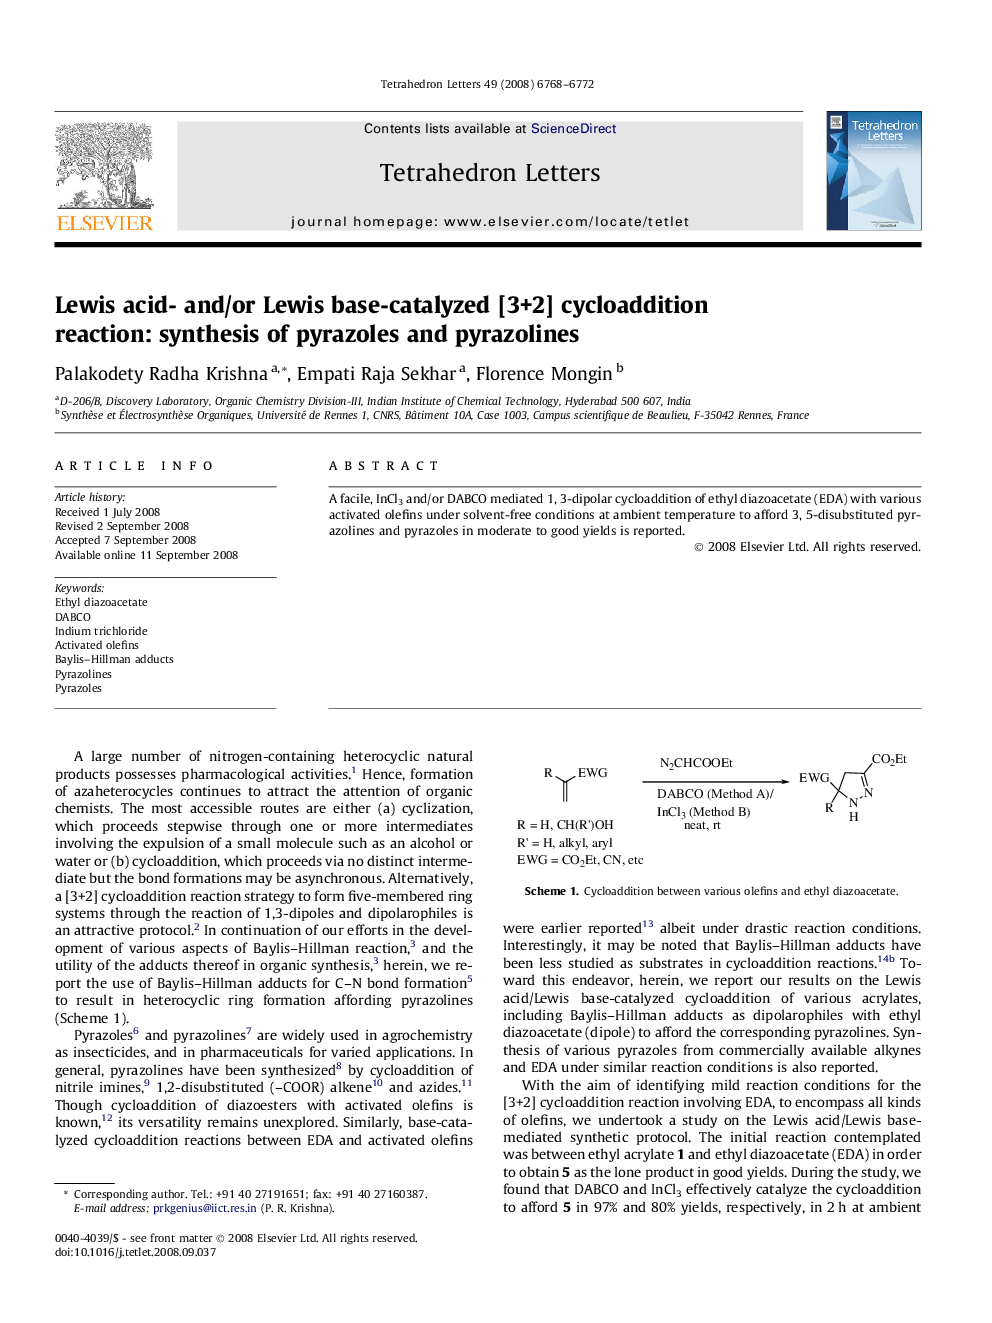 Lewis acid- and/or Lewis base-catalyzed [3+2] cycloaddition reaction: synthesis of pyrazoles and pyrazolines